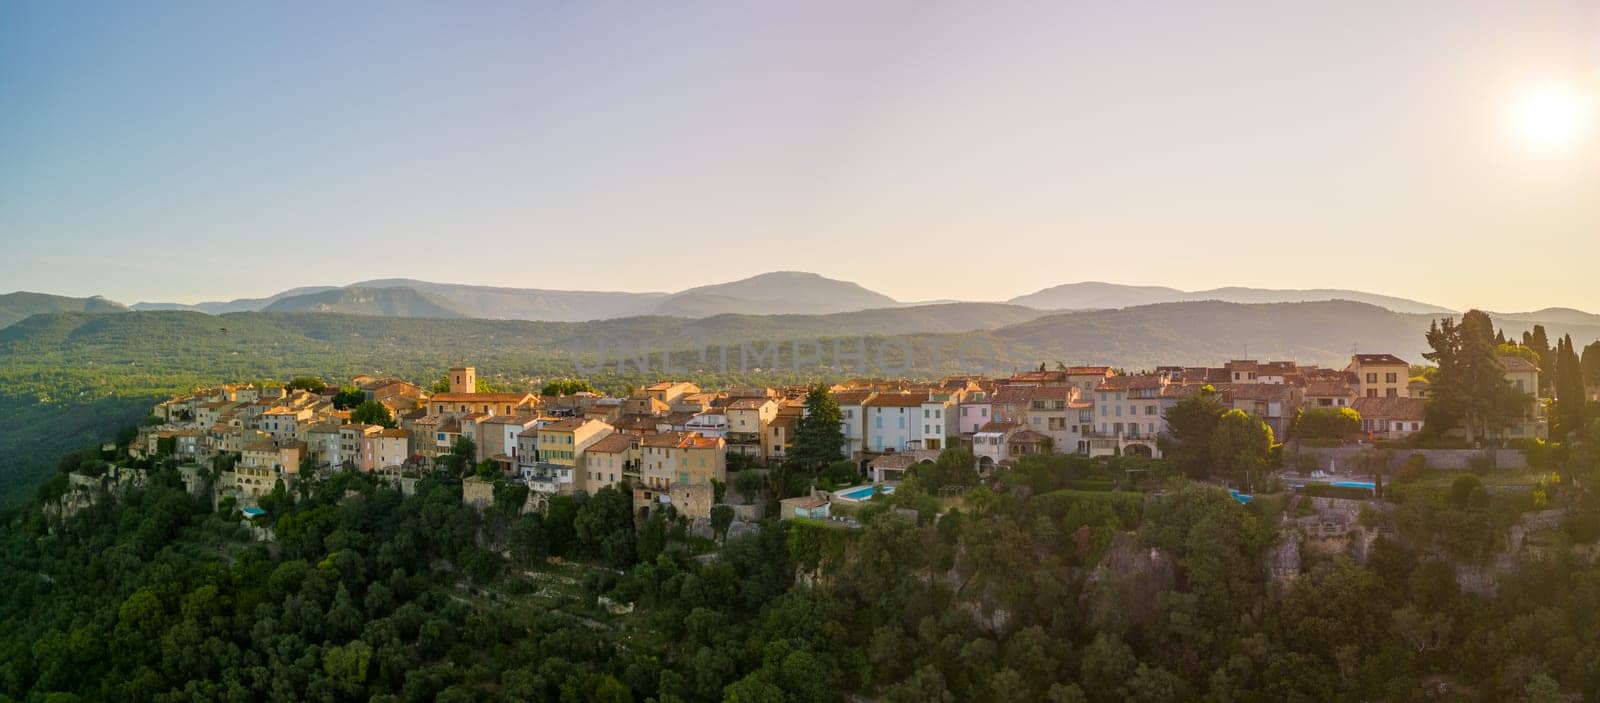 Early morning sun hits historic buildings in French mountain village by Osaze